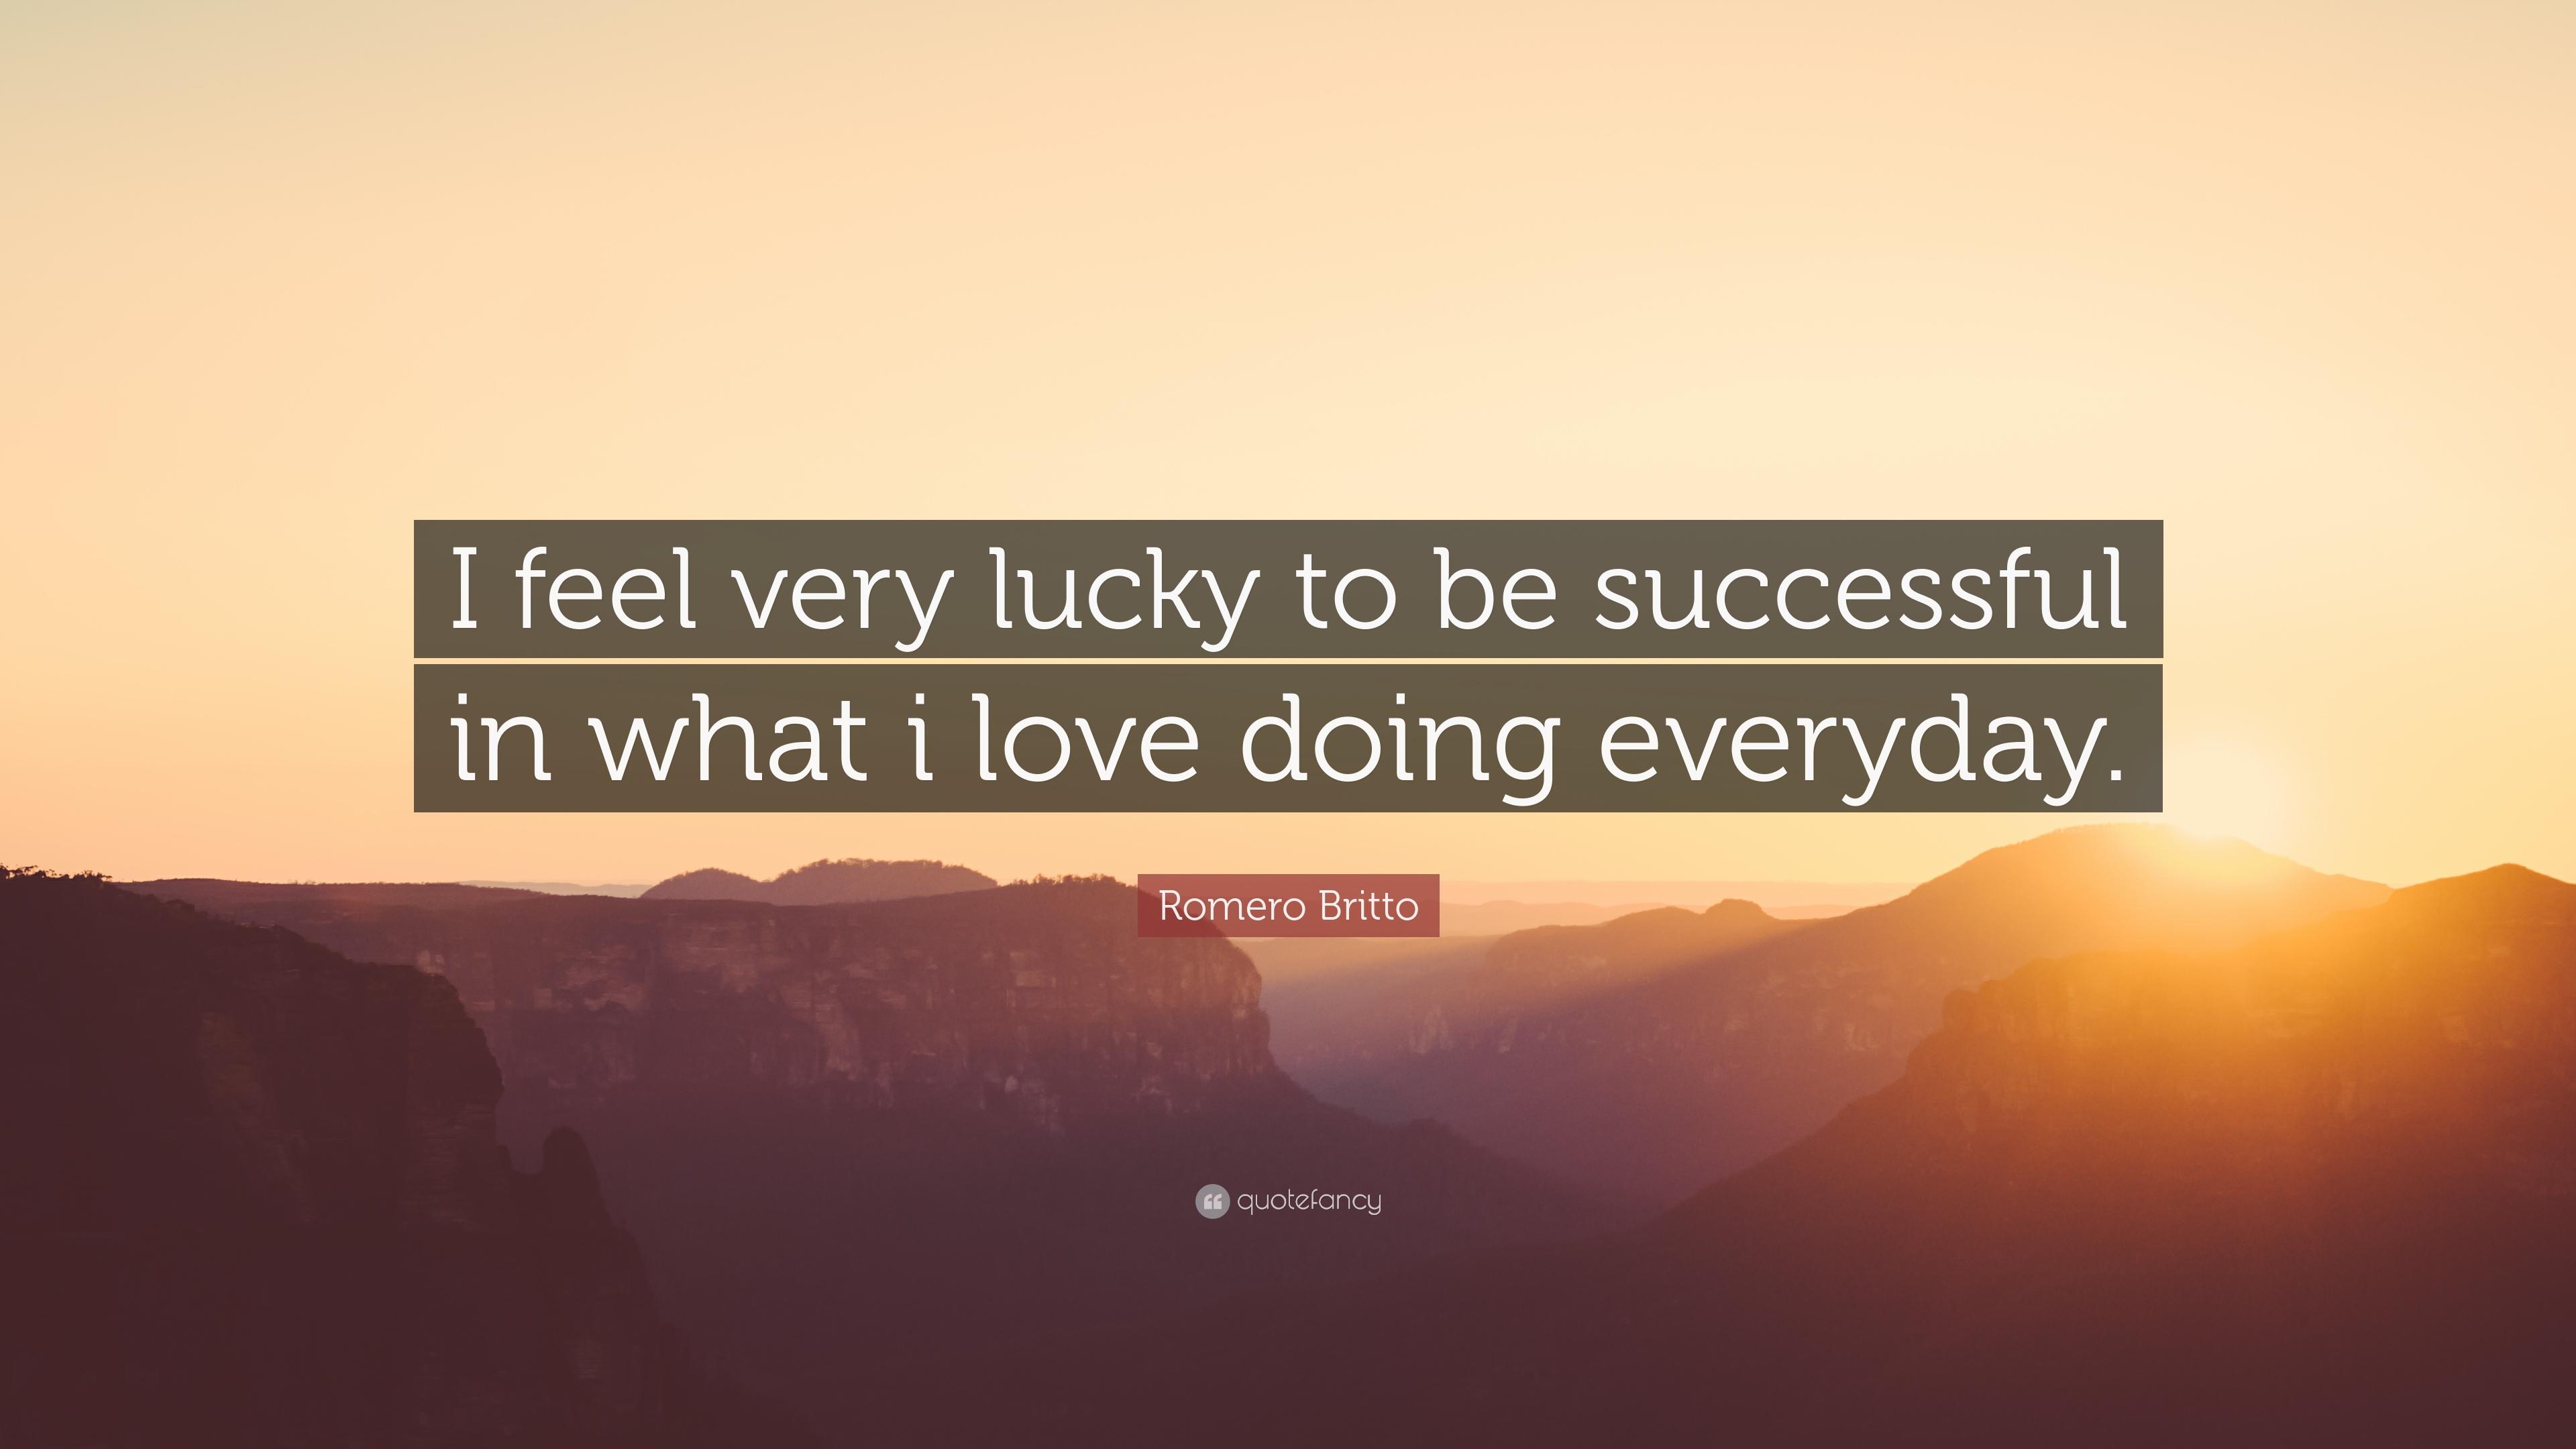 Romero Britto Quote: “I feel very lucky to be successful